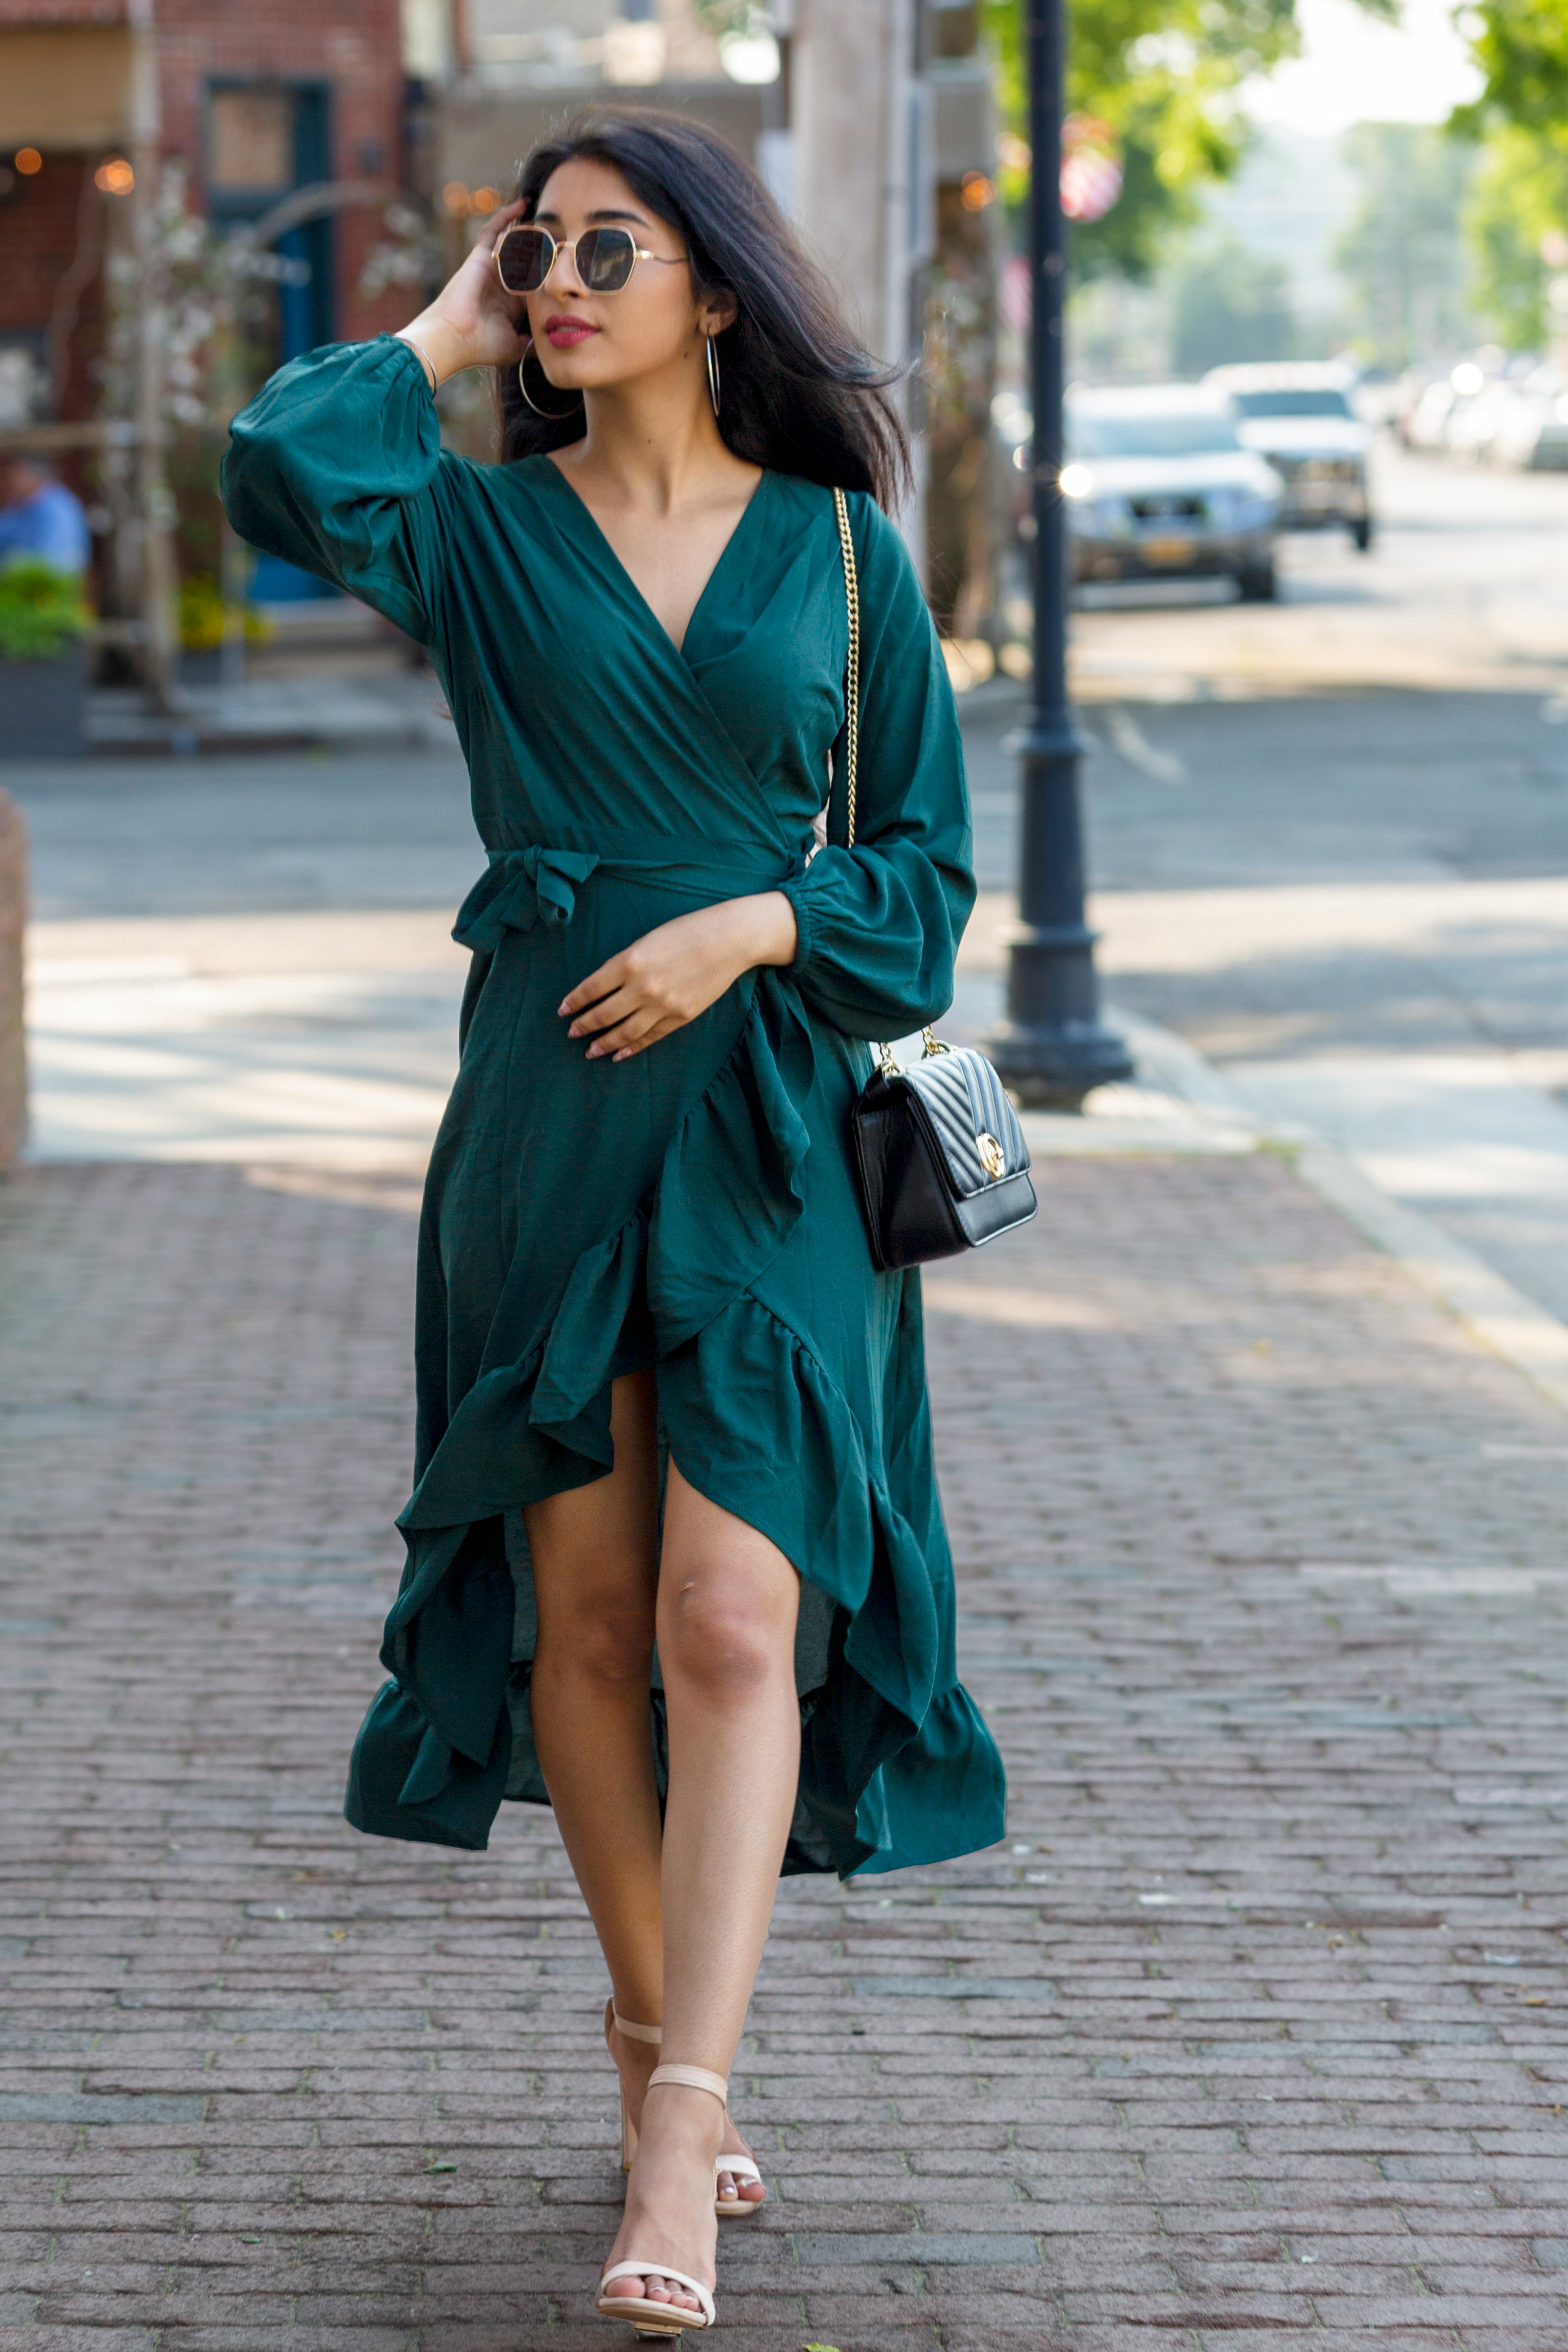 Woman with Sunglasses Wearing a Green Long Sleeves Dress · Free Stock Photo